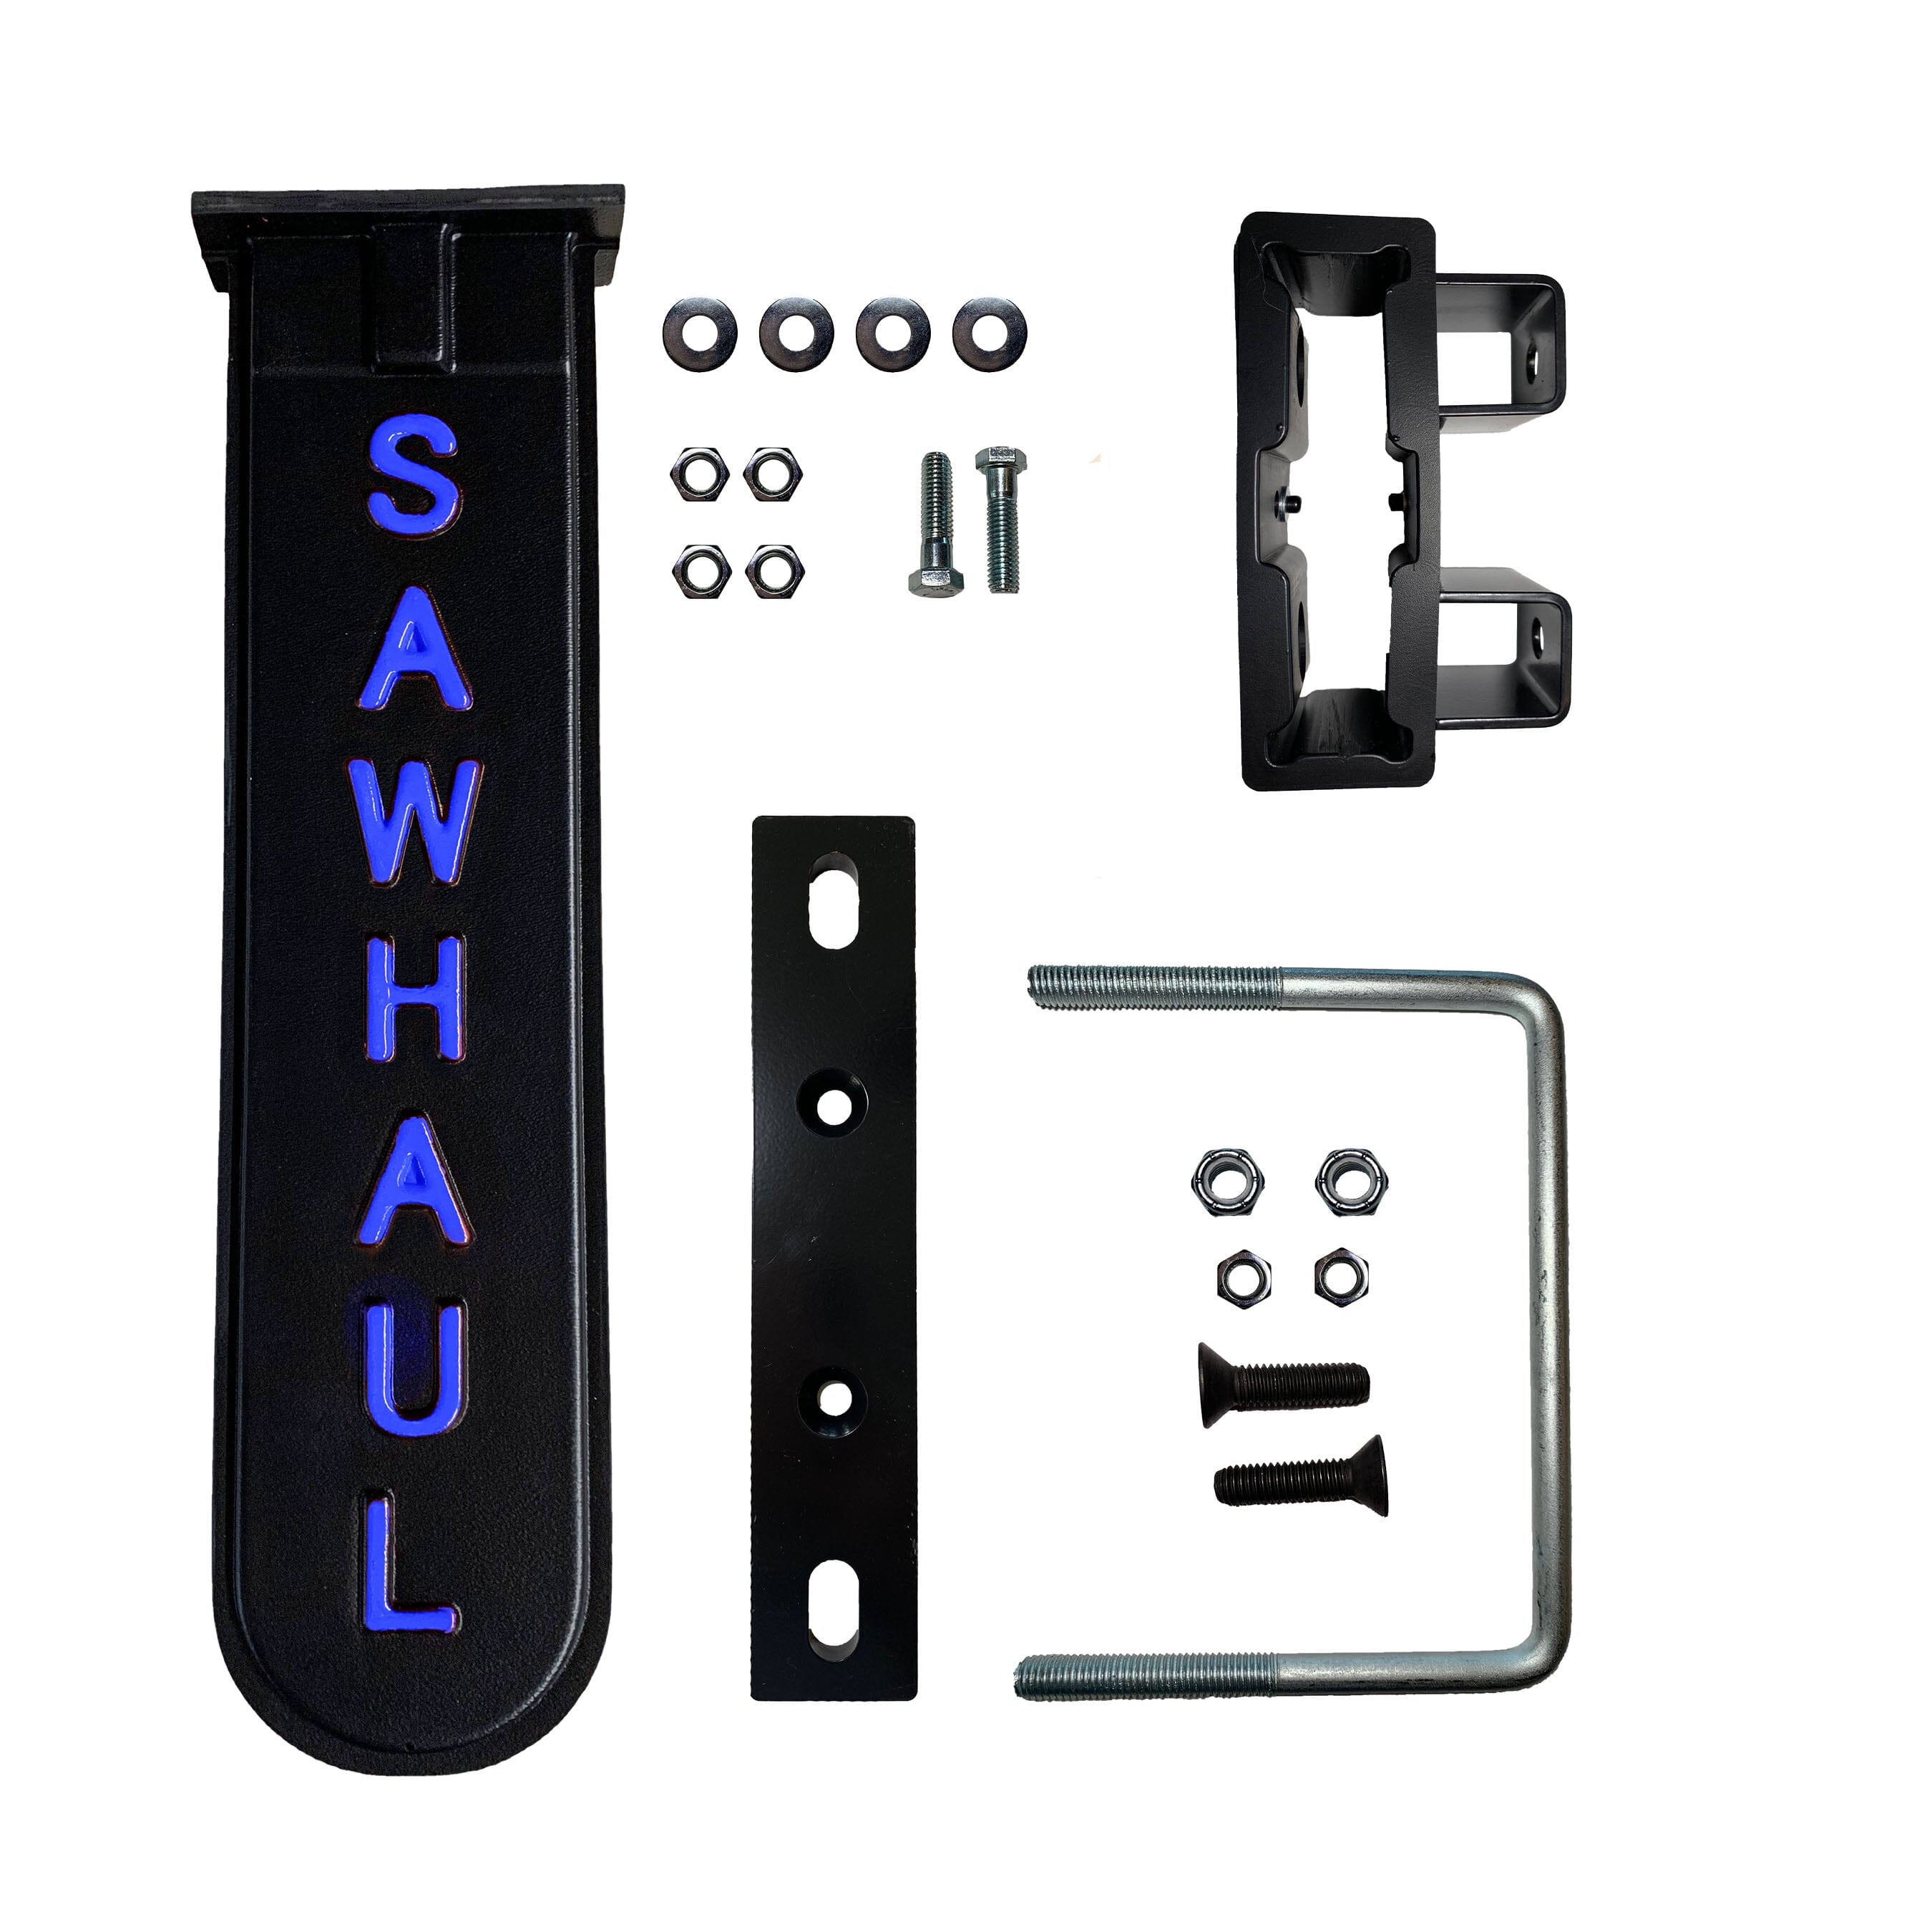 SawHaul Complete Kit for Tractors Complete Kit SawHaul 